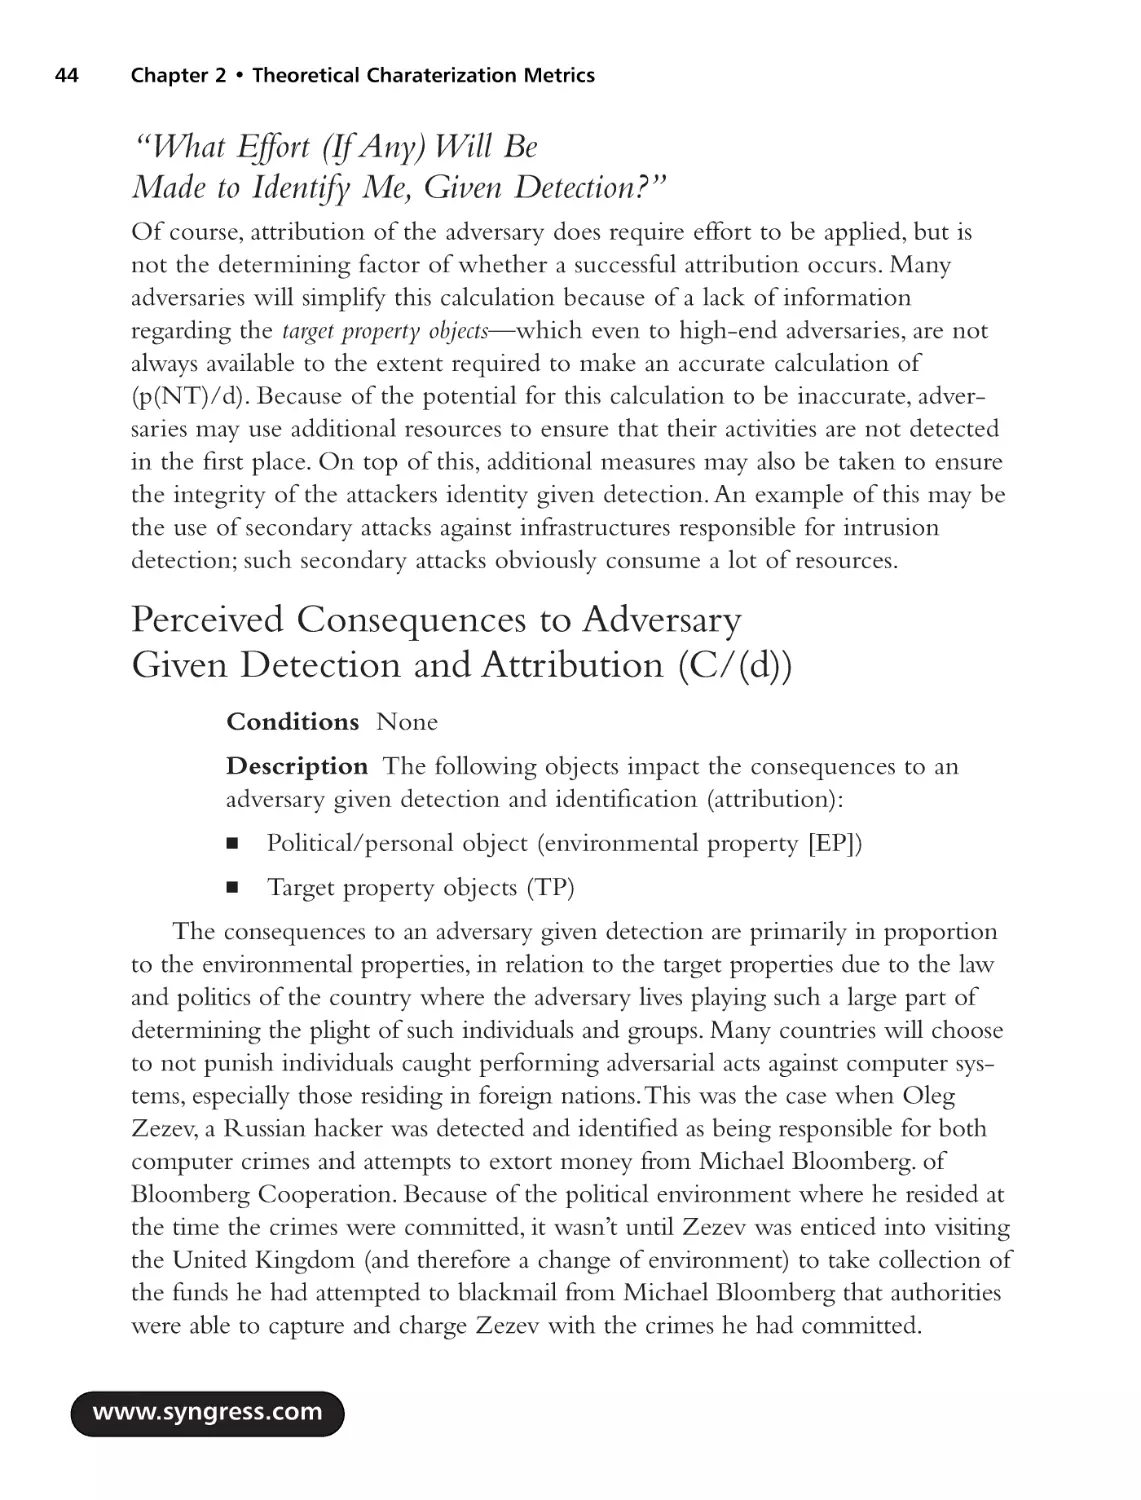 Perceived Consequences to Adversary Given Detection and Attribution (C/(d))